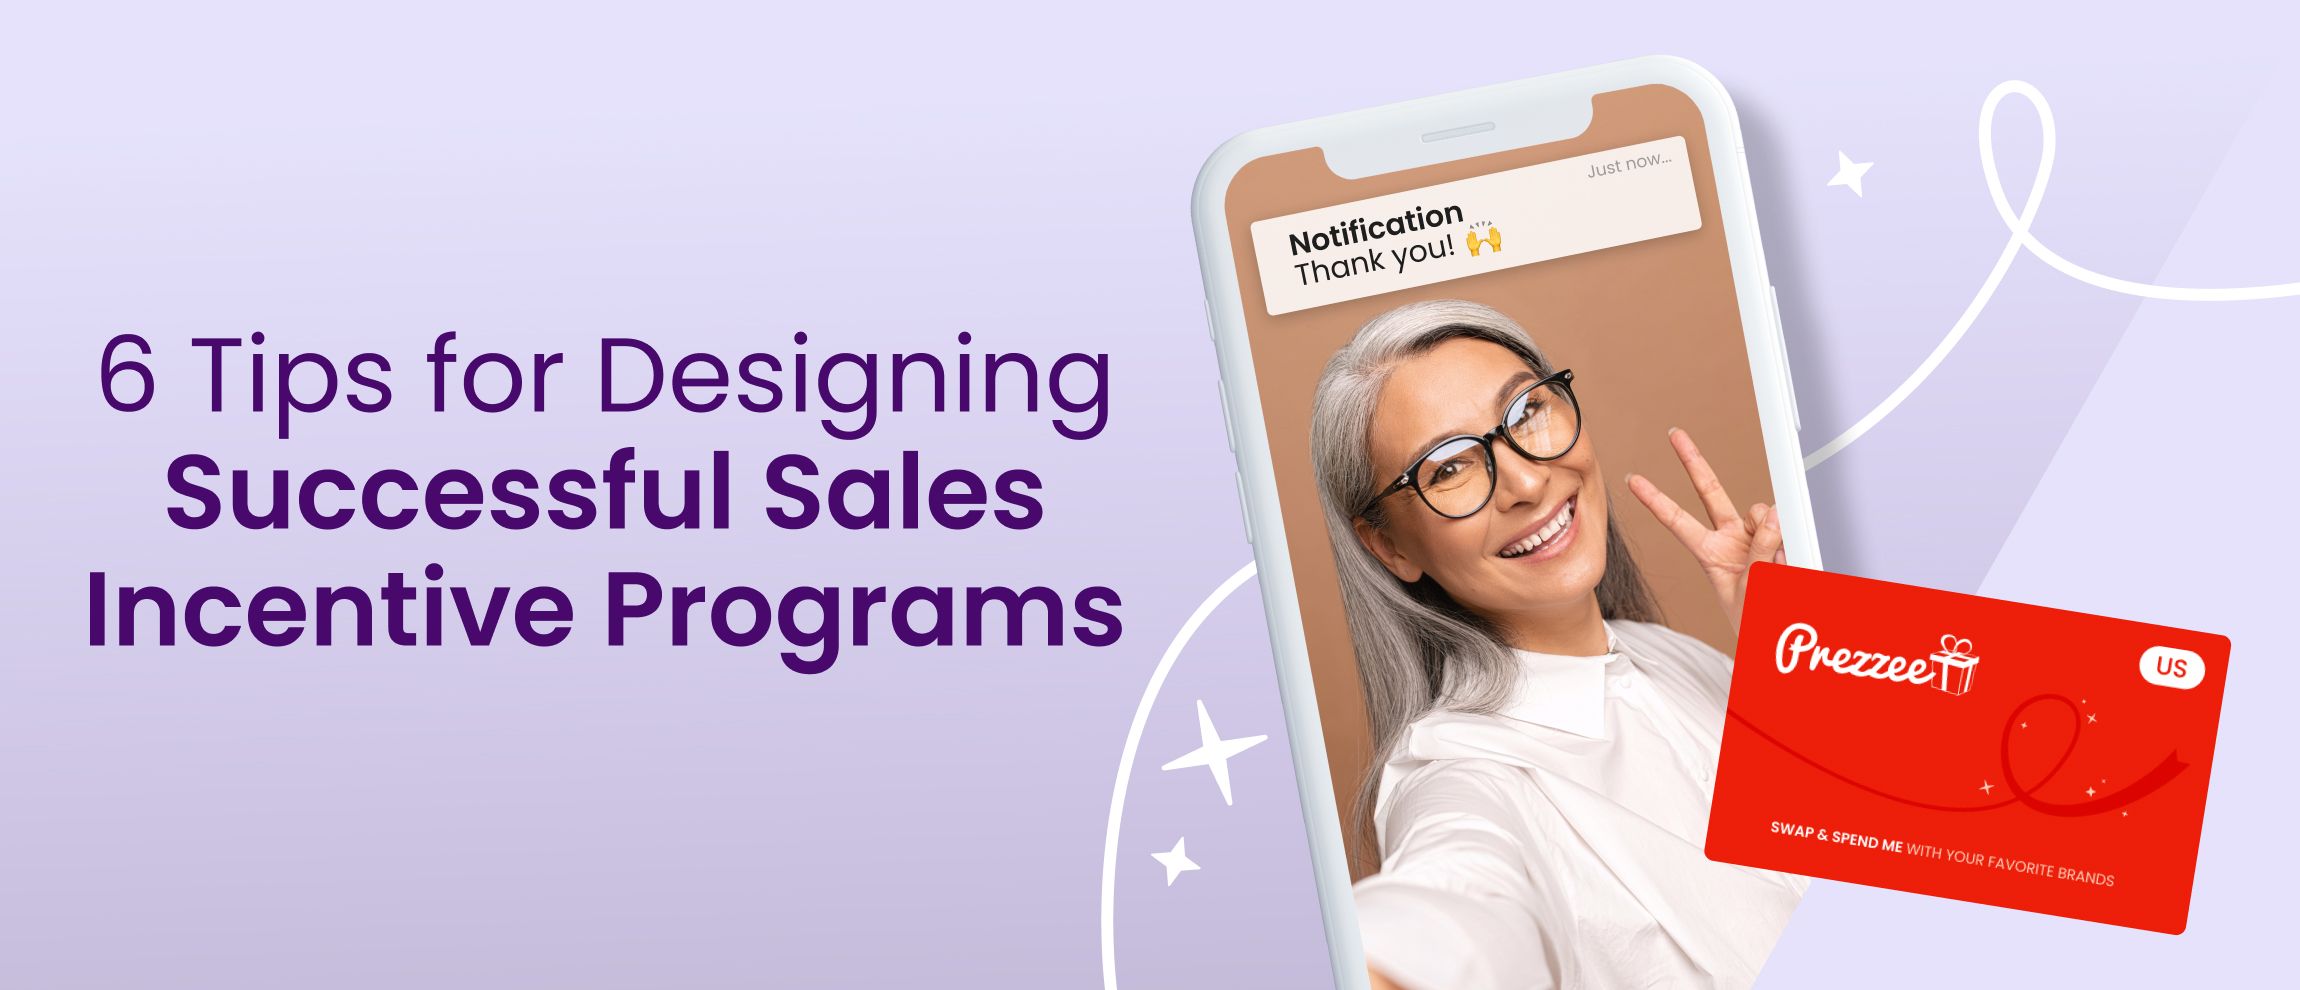 6-tips-for-designing-successful-sales-incentive-programs